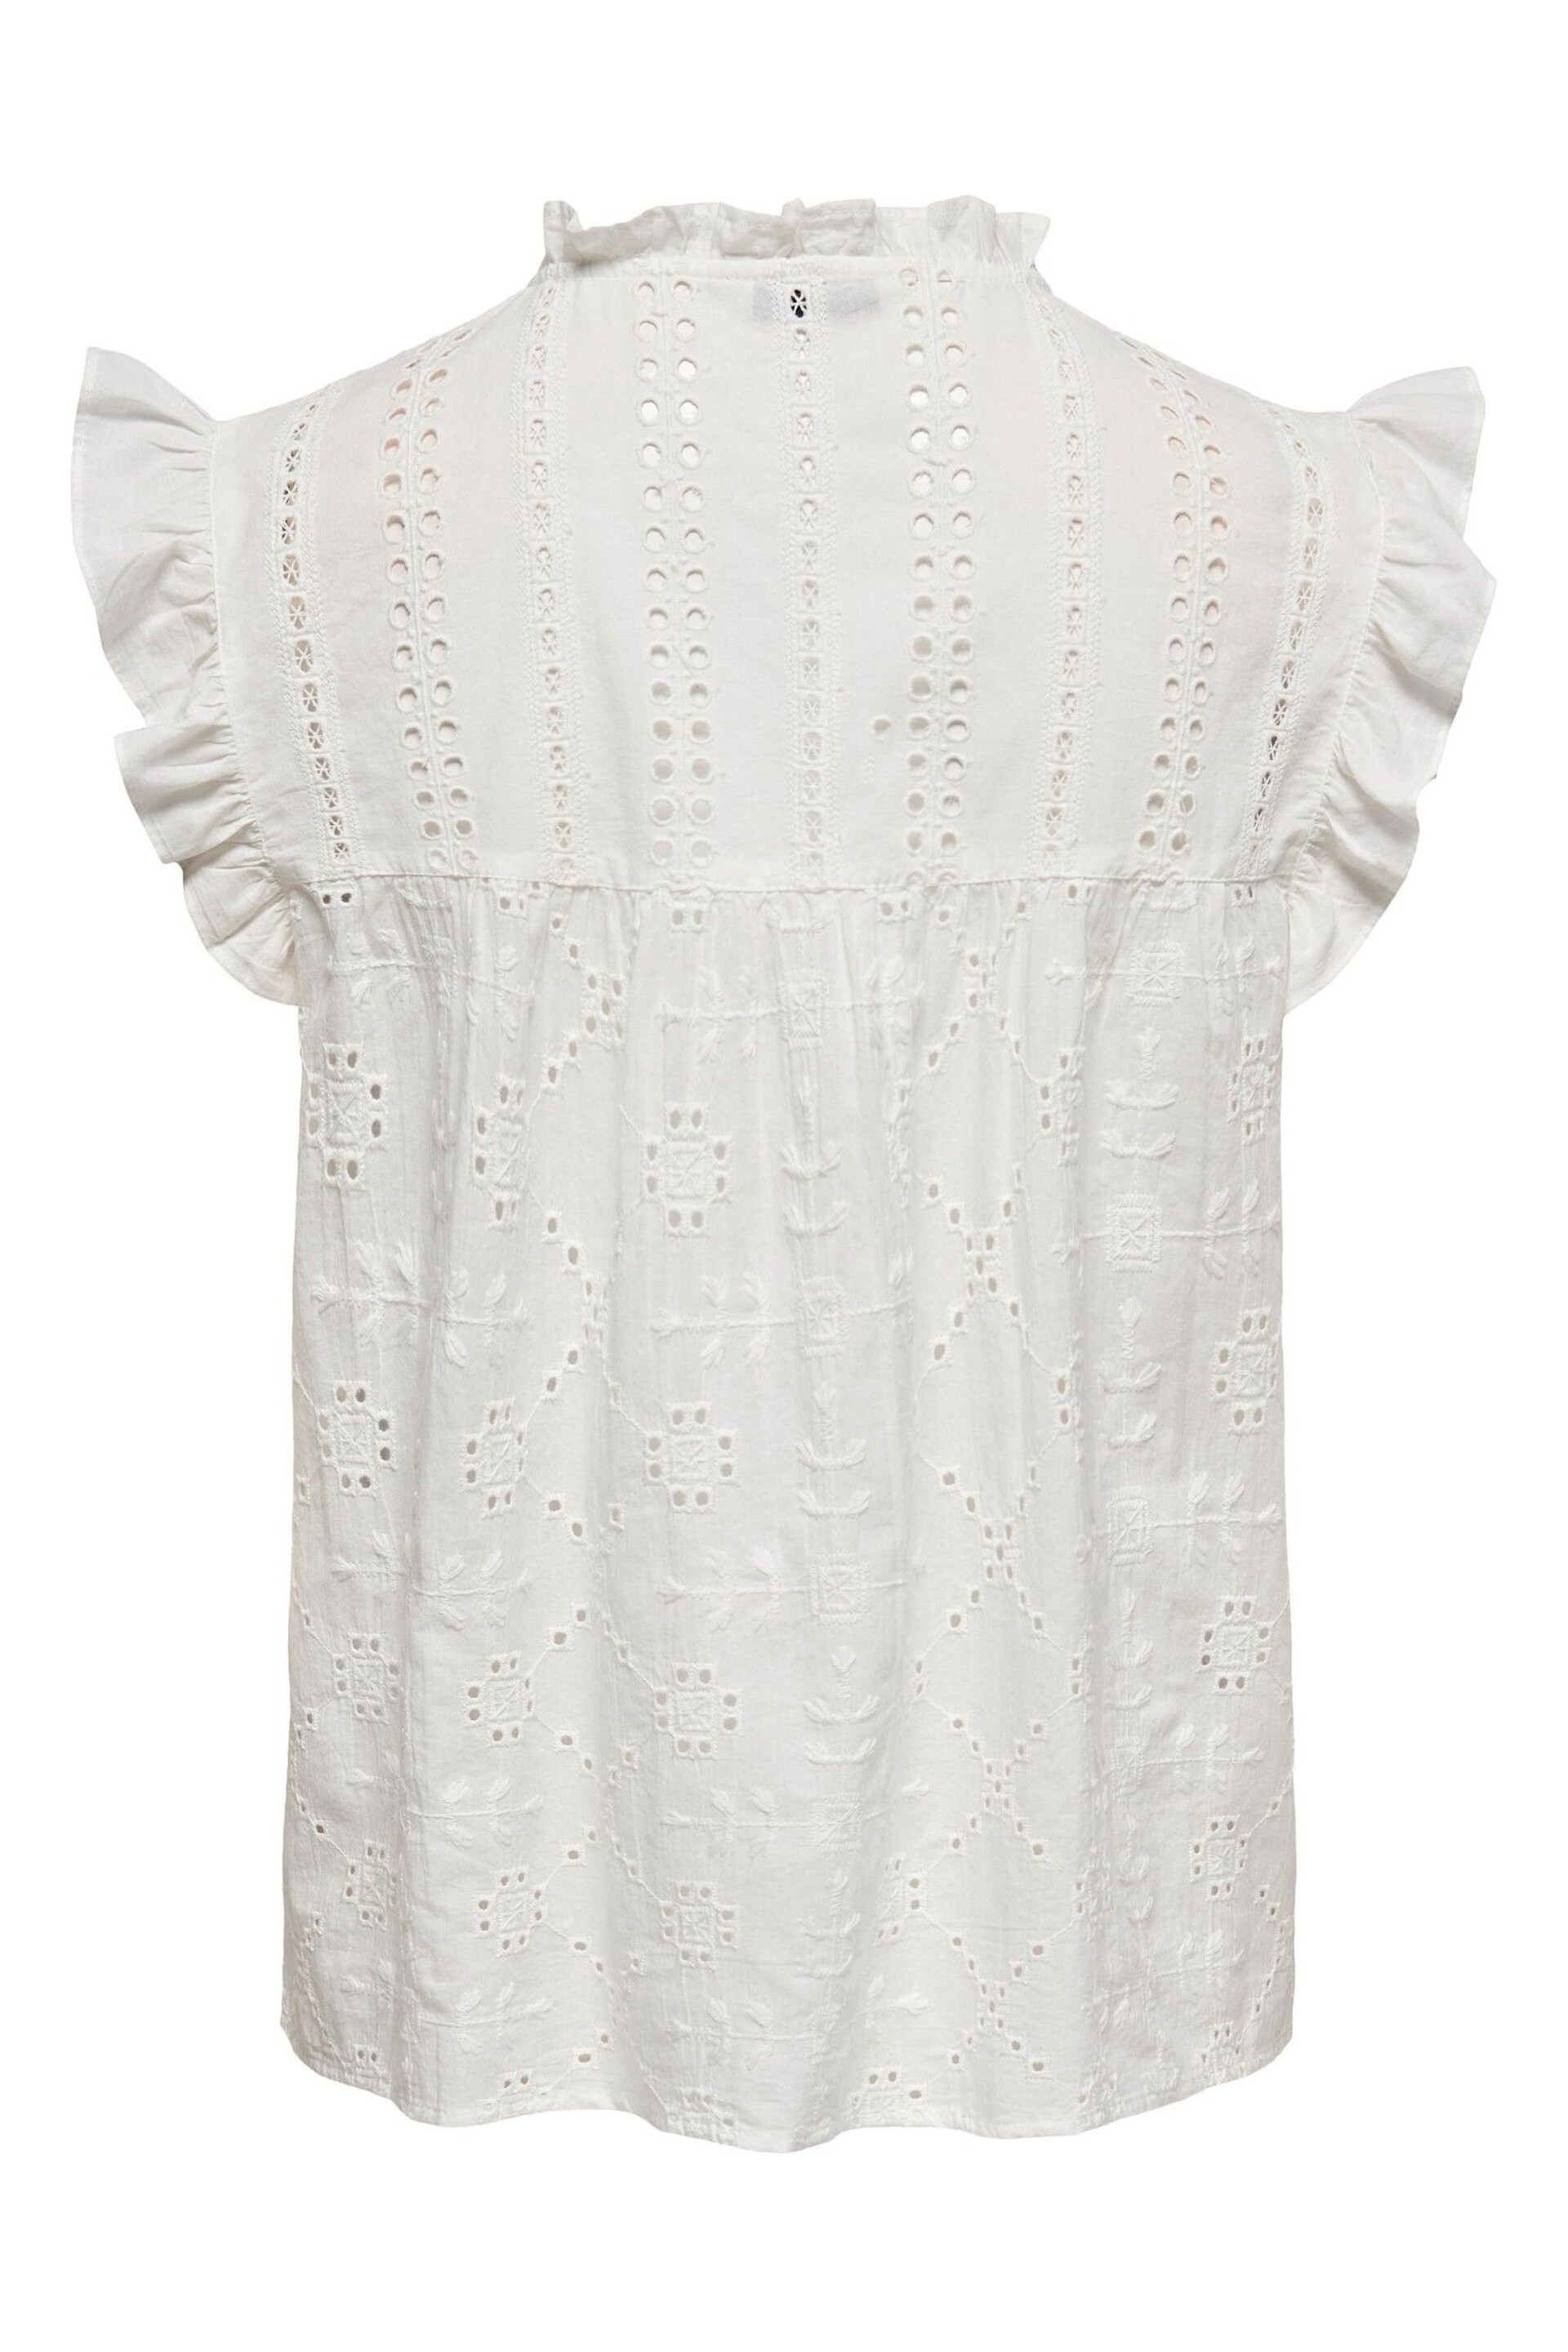 ONLY White Broderie Frill Tie Front Blouse - Image 6 of 6